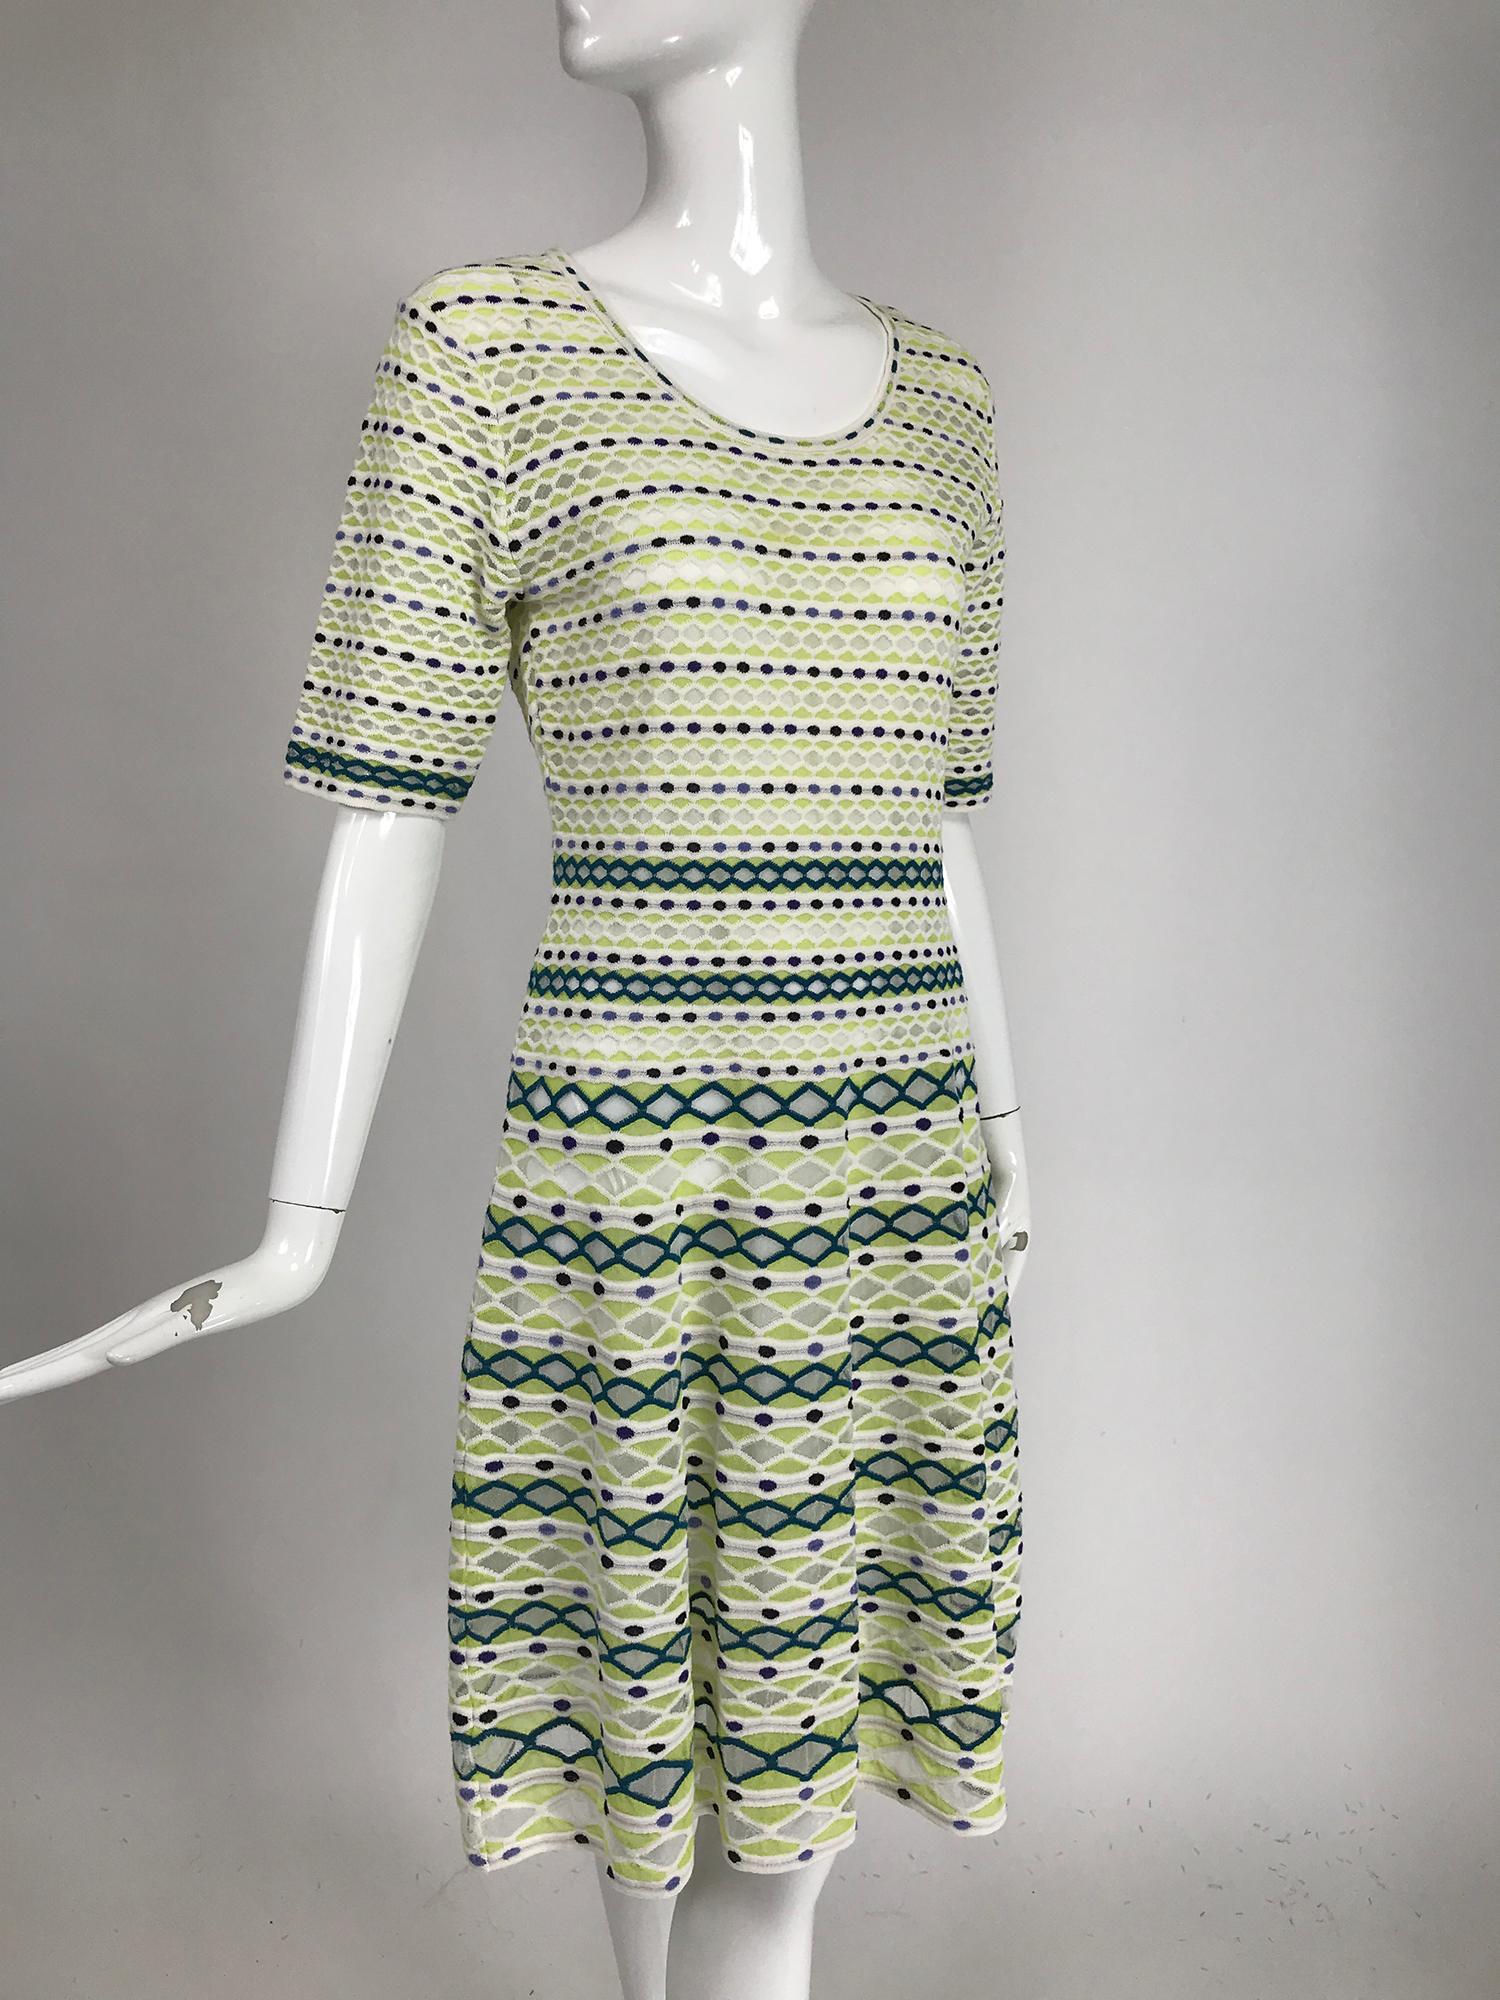 Missoni lime, white & black honeycomb knit dress. Pull on dress with scoop neck, elbow length sleeves and a fit and flare shape. The stretch knit sheer in a pattern surrounded with white knit outline, inter spaced with bands of black and blue oval